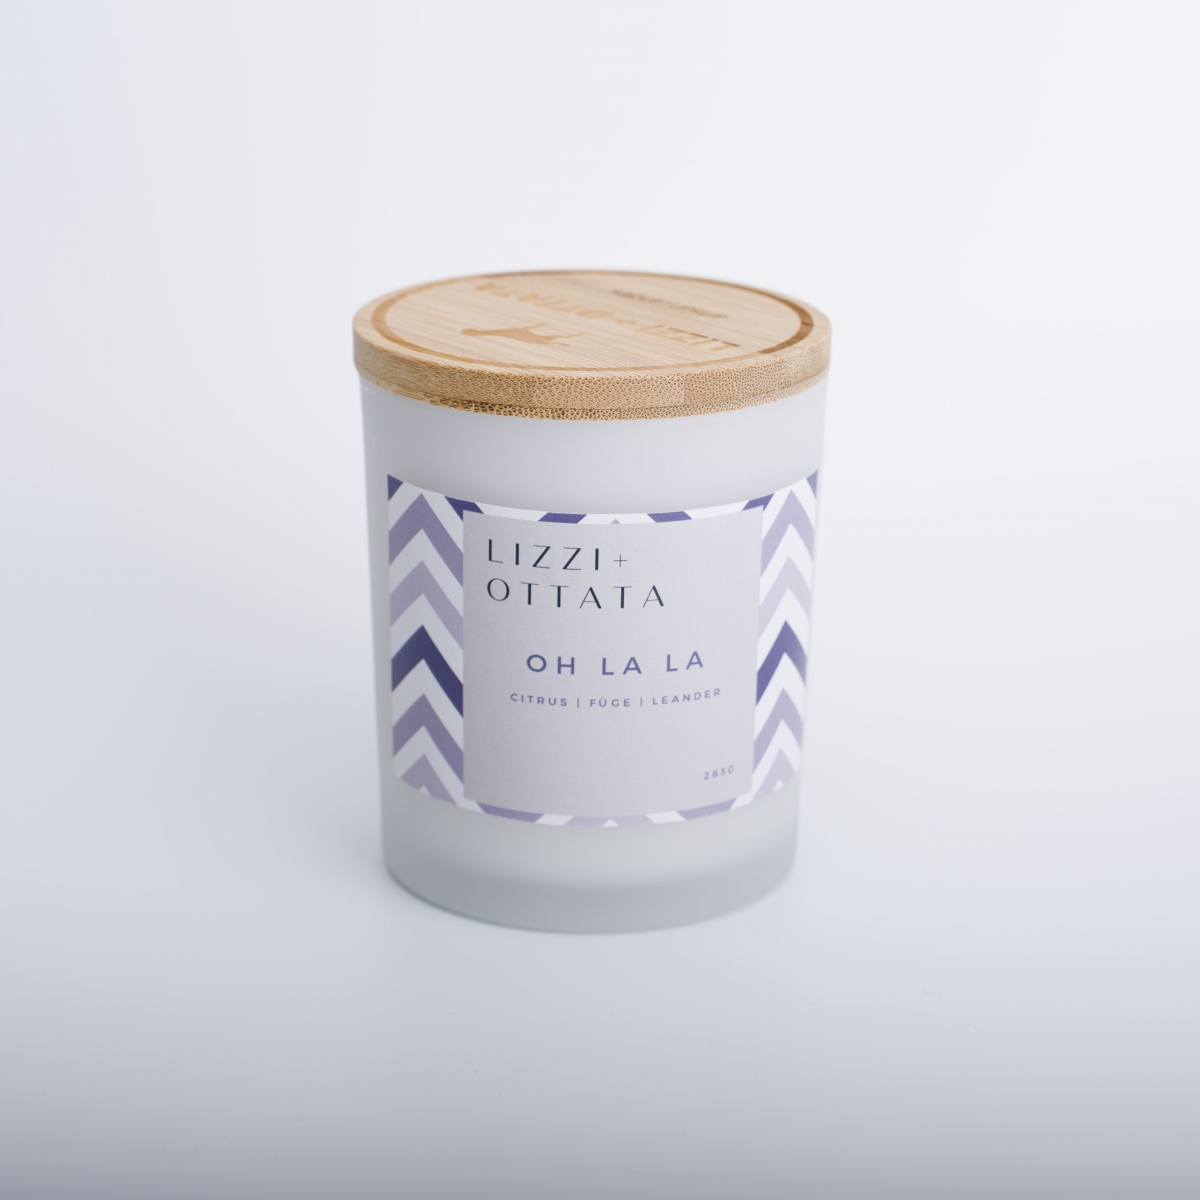 Scented Candles：Creed Aventus, Soy Candles, Pet Safe, China Factory ,Best Price ,High Quality-HOWCANDLE-Candles,Scented Candles,Aromatherapy Candles,Soy Candles,Vegan Candles,Jar Candles,Pillar Candles,Candle Gift Sets,Essential Oils,Reed Diffuser,Candle Holder,